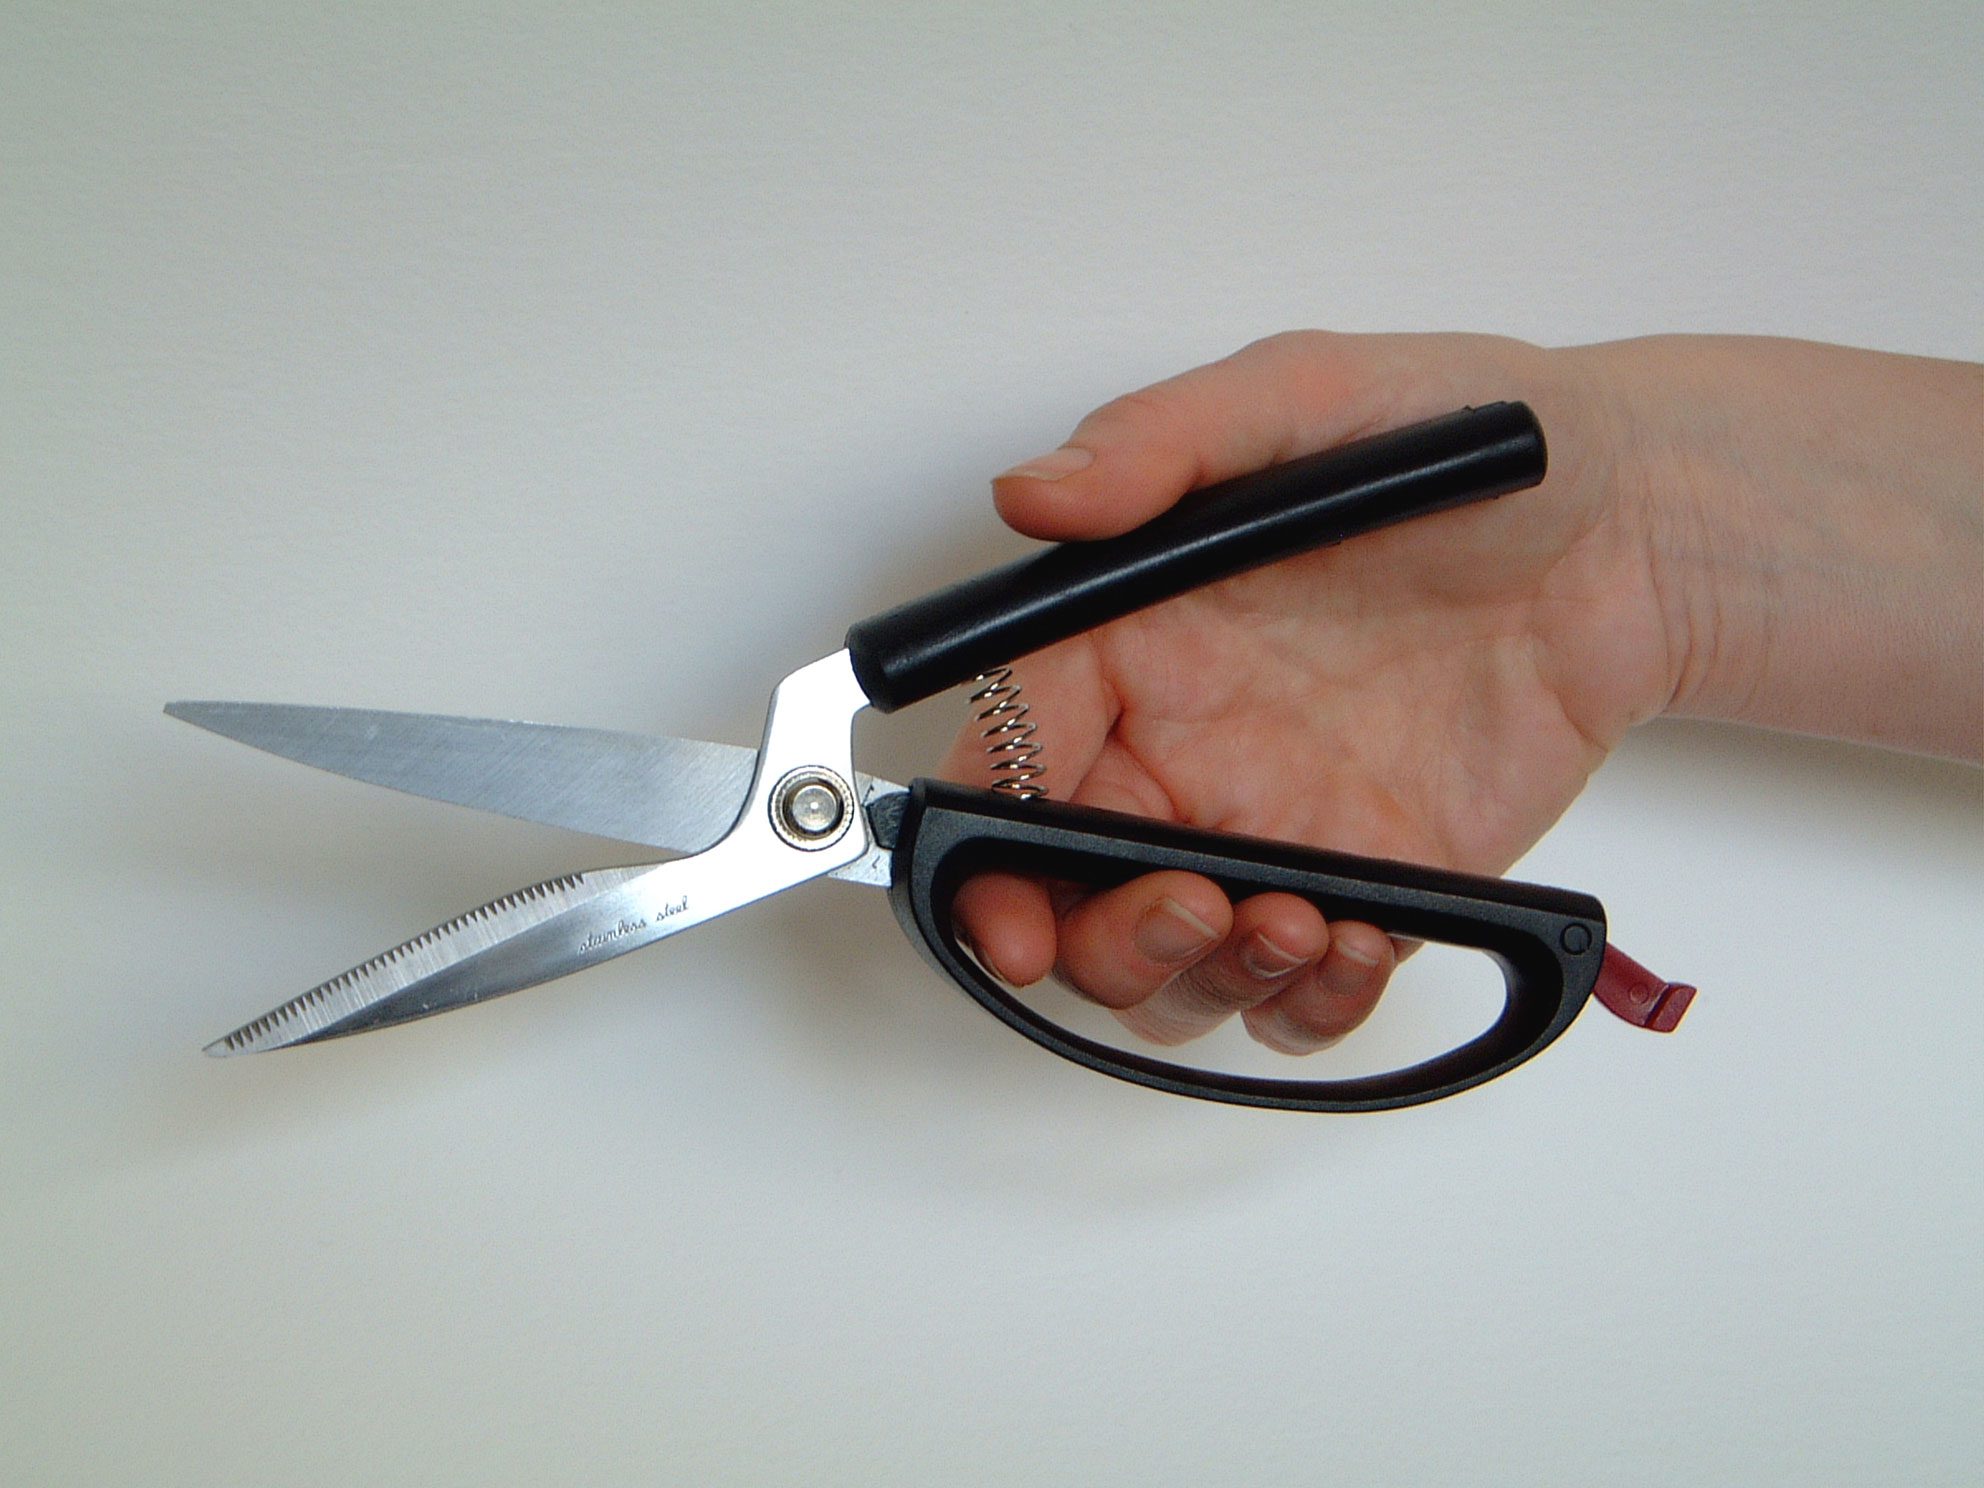 Self Opening Kitchen Shears : stainless steel spring scissors